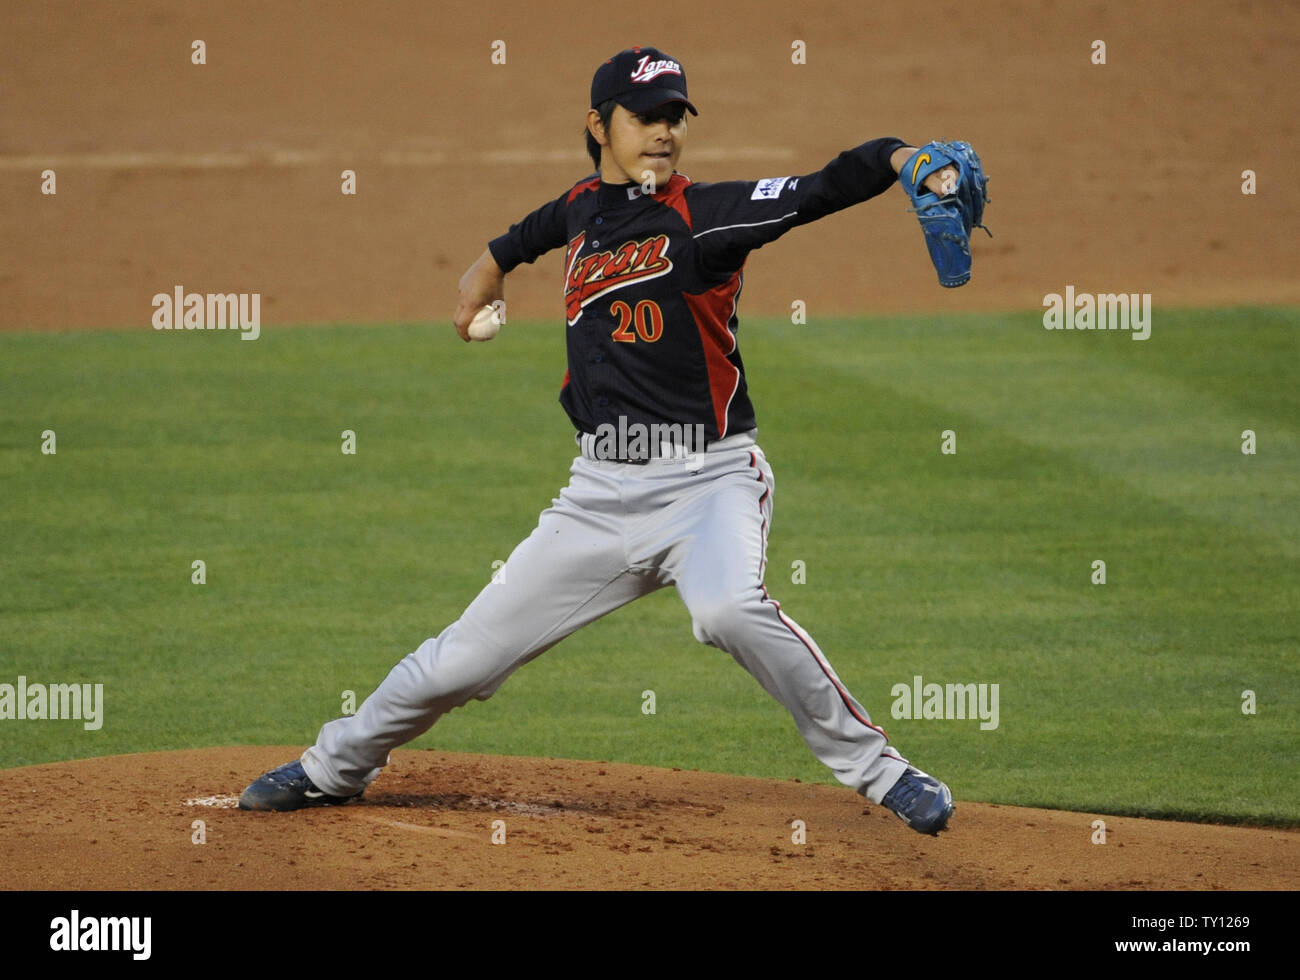 Japan's Hisashi Iwakuma pitches against Korea during the first inning of their World Baseball Classic final at Dodger Stadium in Los Angeles on March 23, 2009. (UPI Photo/ Phil McCarten) Stock Photo